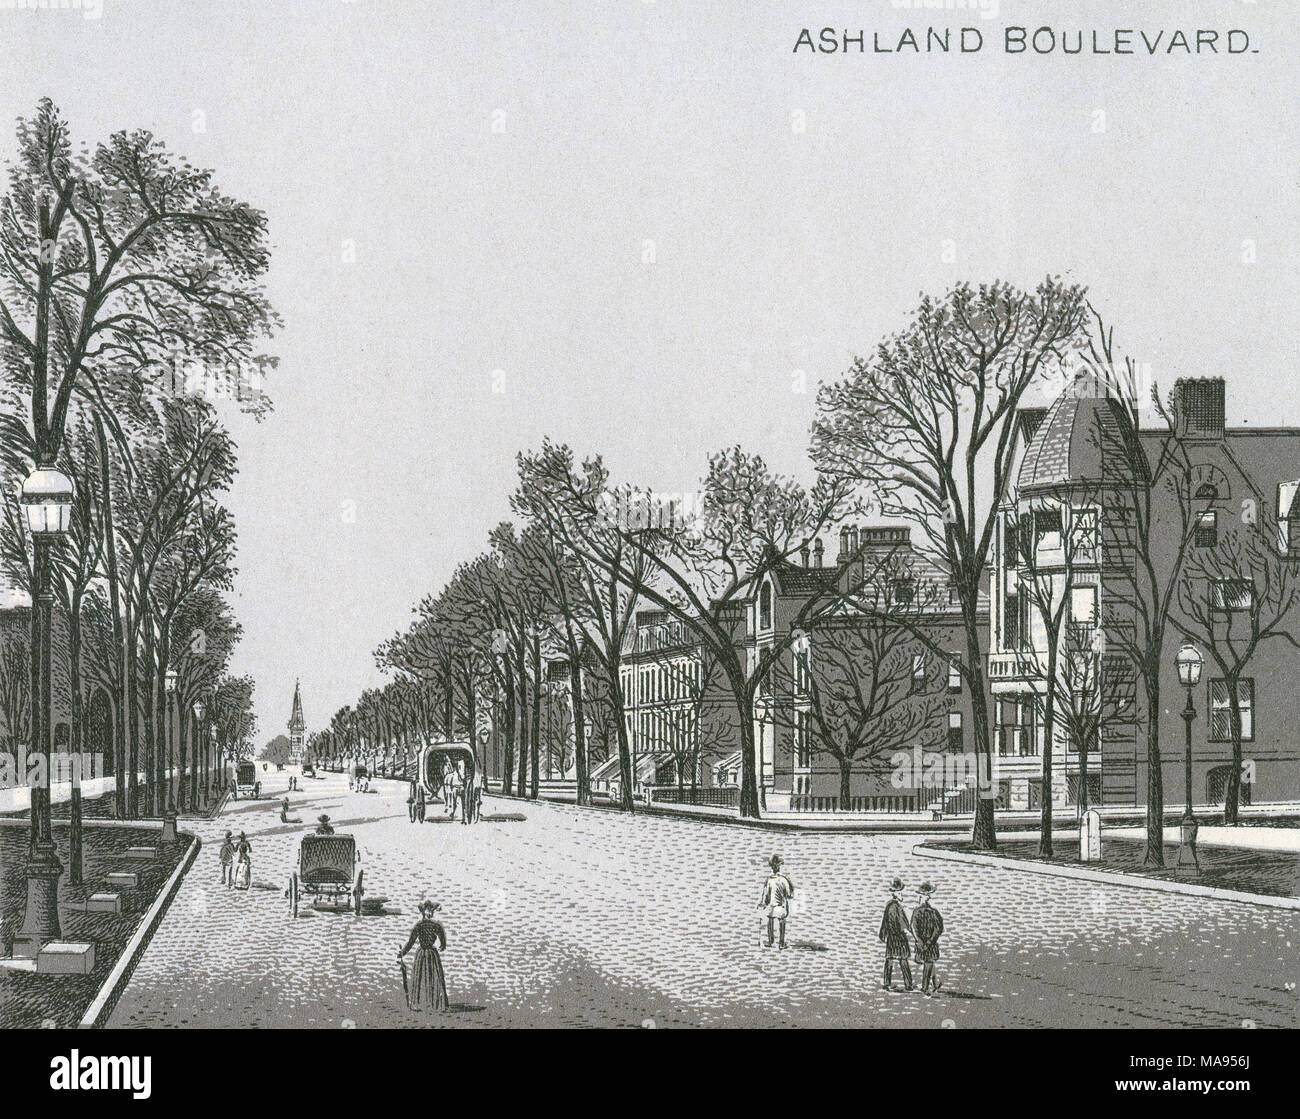 Antique c1885 monochromatic print from a souvenir album, showing Ashland Boulevard in Chicago, Illinois. Printed with the Glaser/Frey lithographic process, a multi-stone lithographic process developed in Germany. Stock Photo